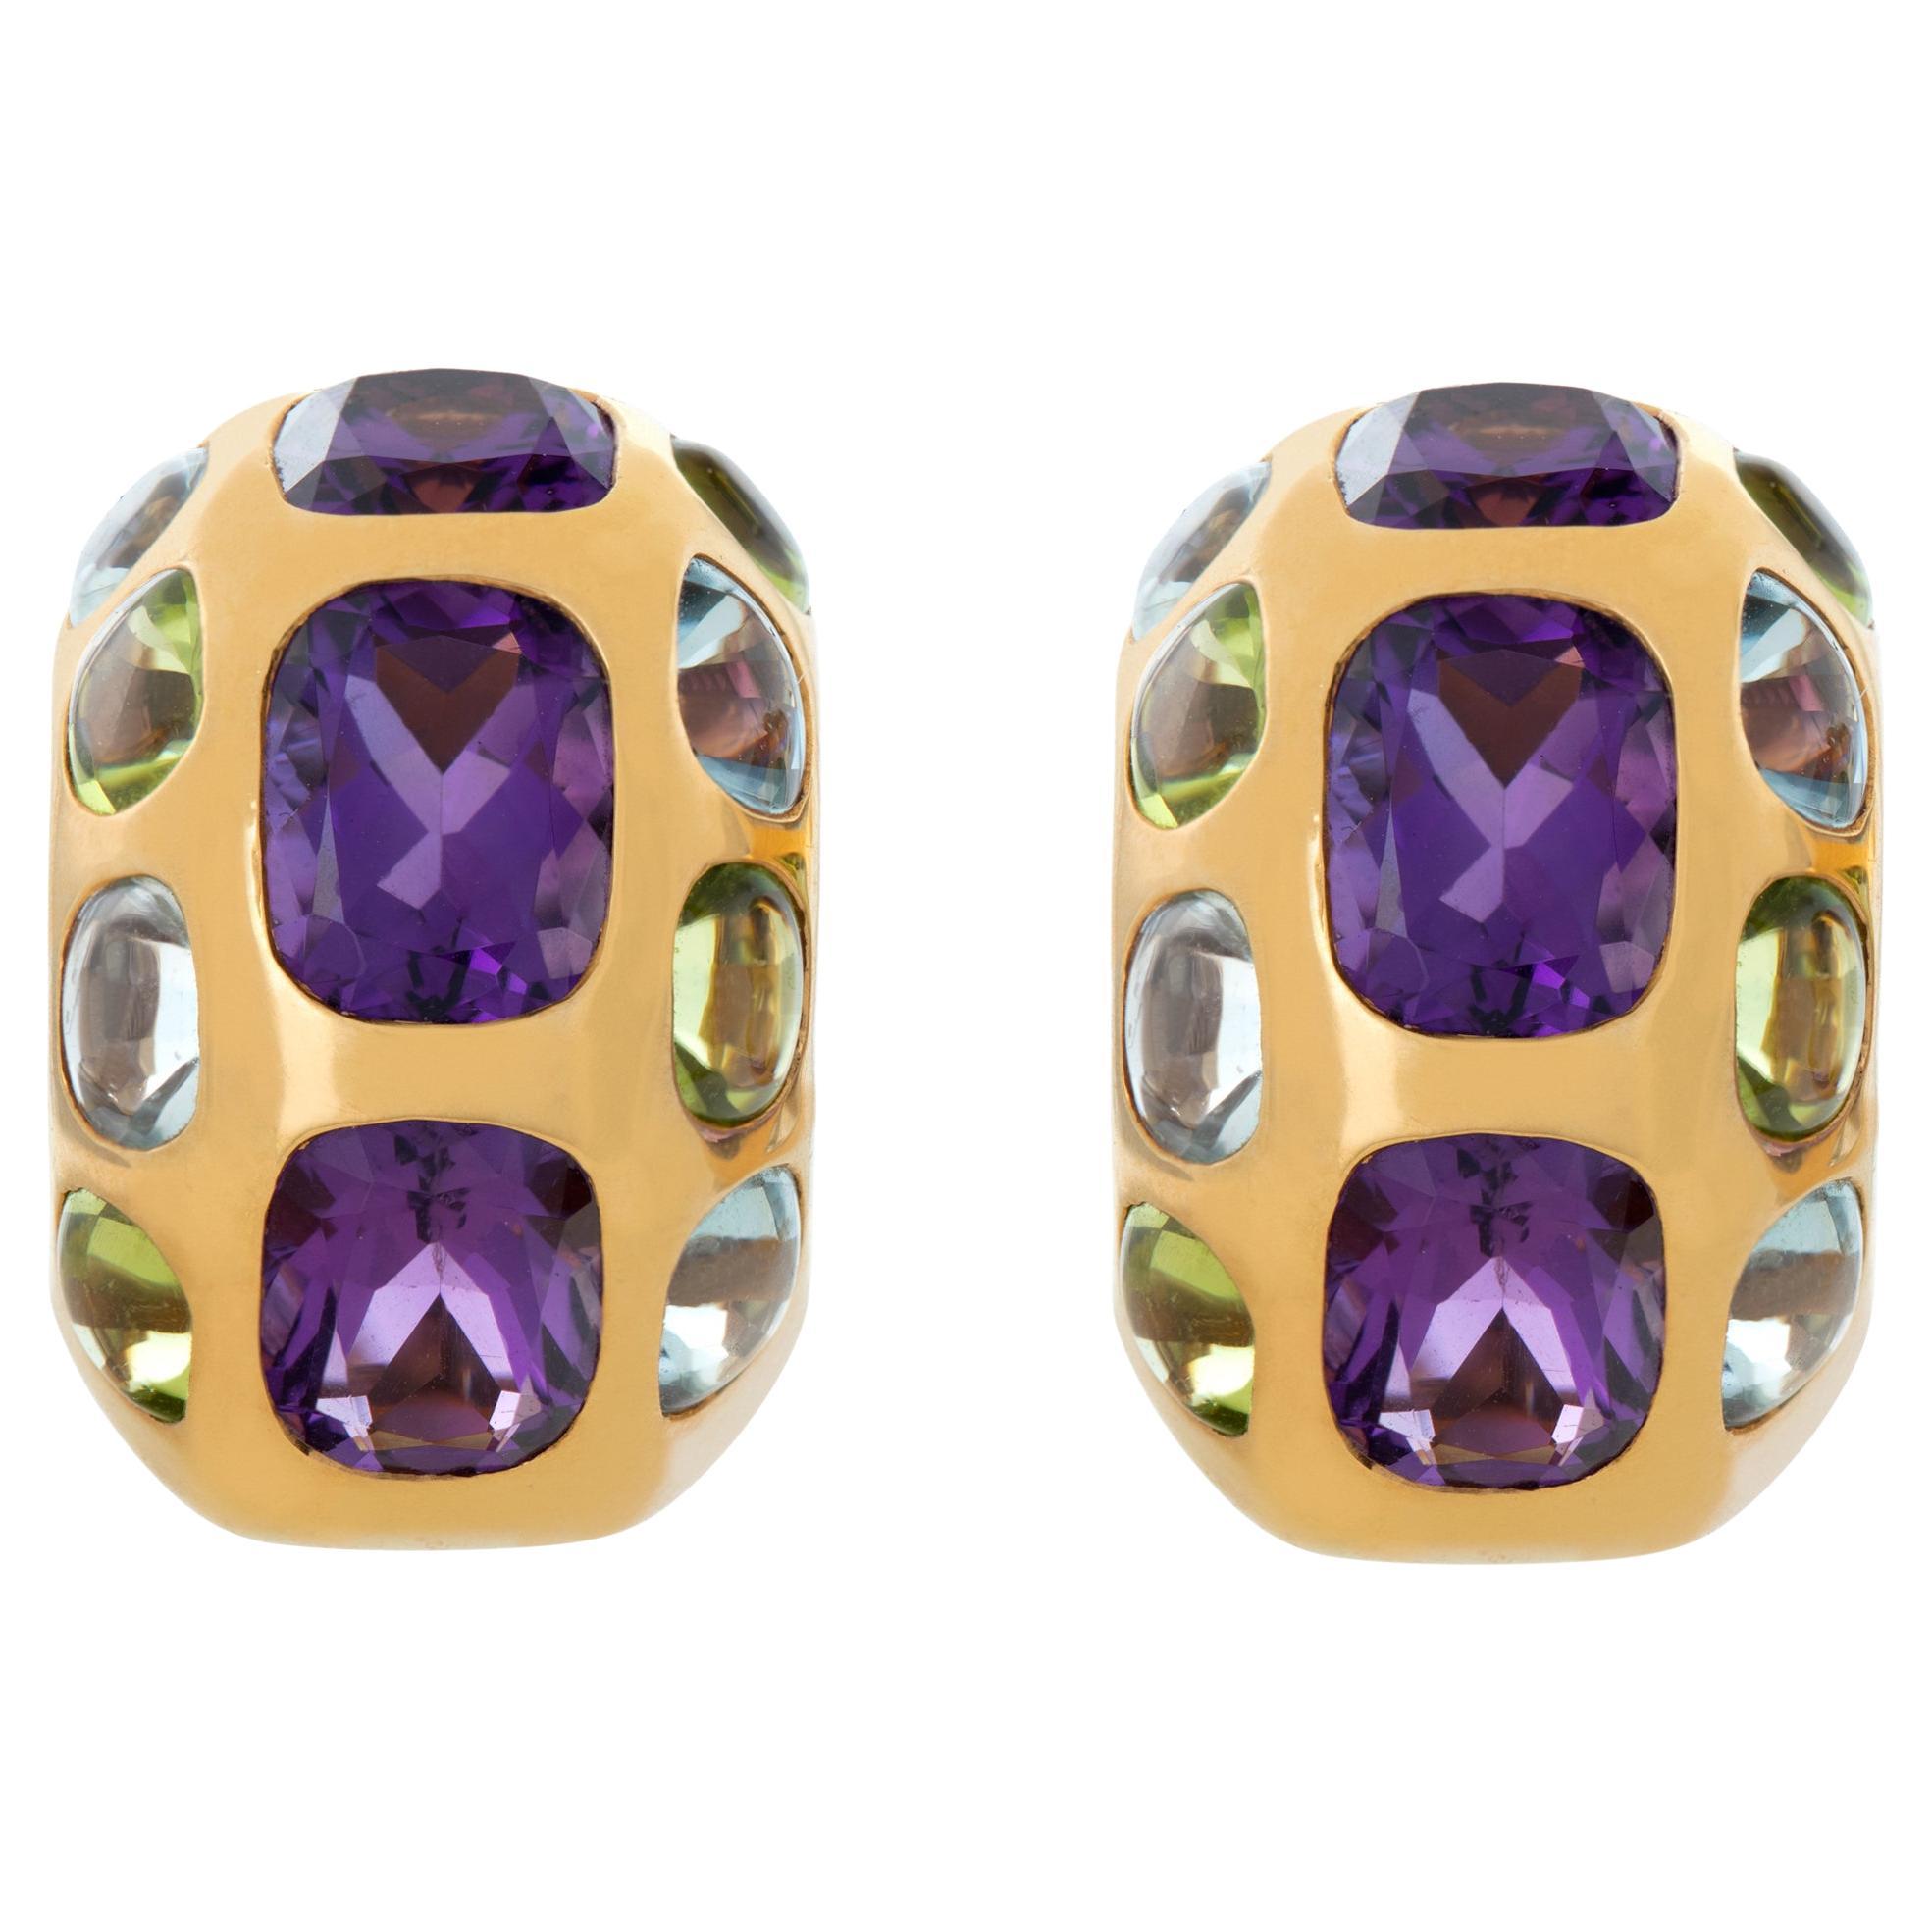 Chanel Earrings with Amethyst, Peridot and Aquamarine in 18k Yellow Gold